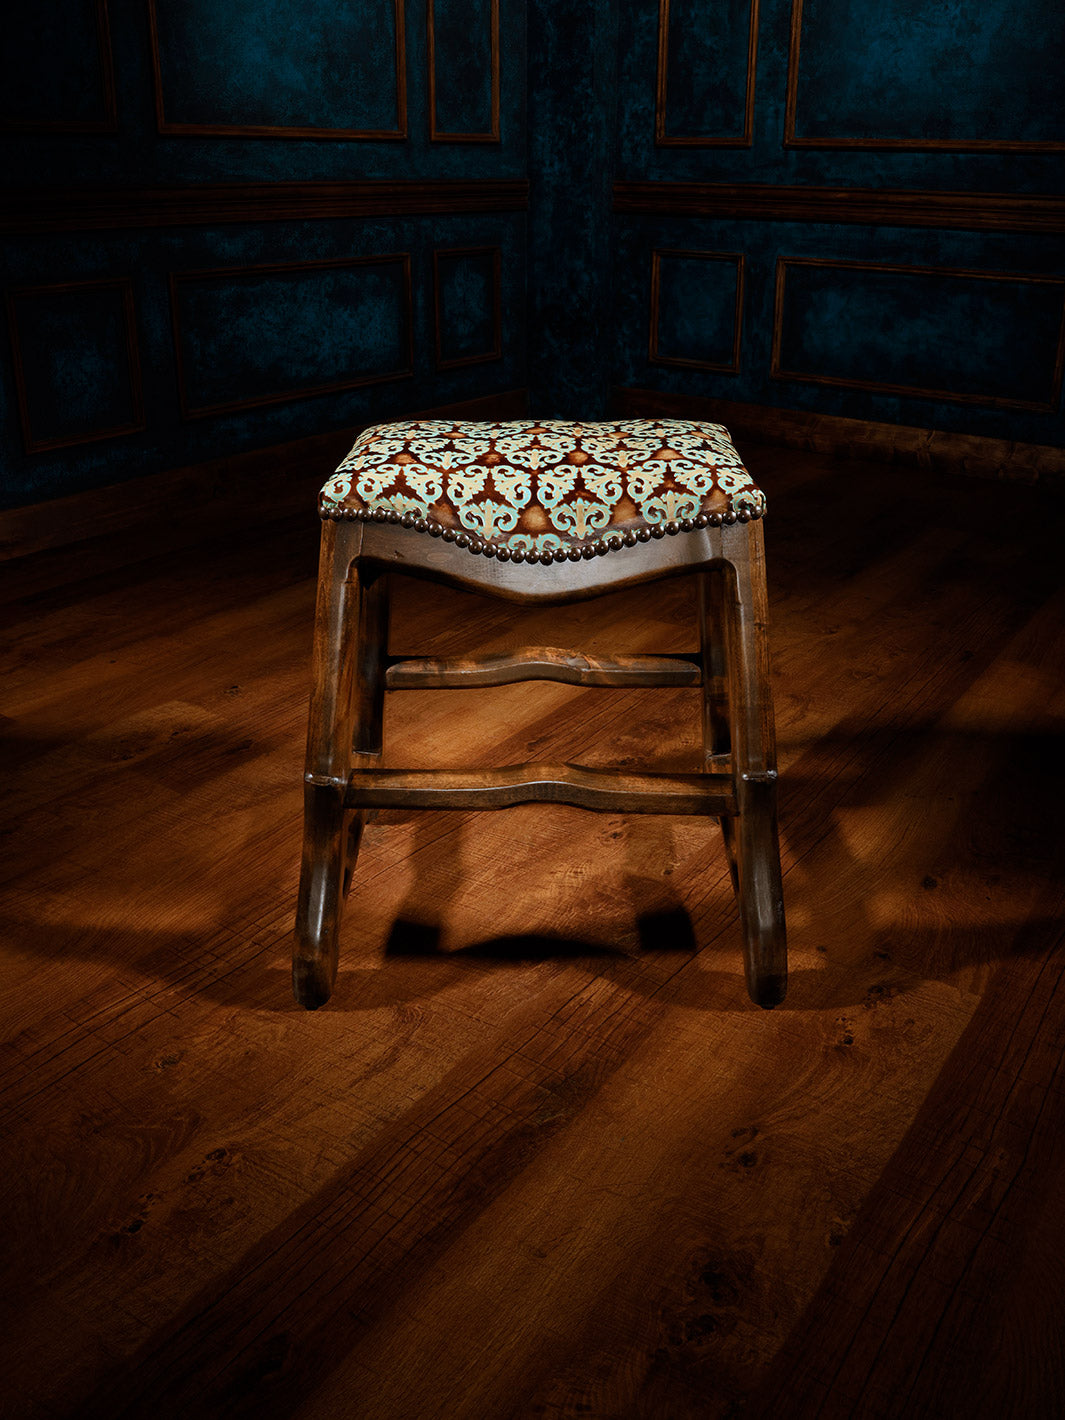 Stanley Tooled Leather Saddle Stool – Runyon's Fine Furniture